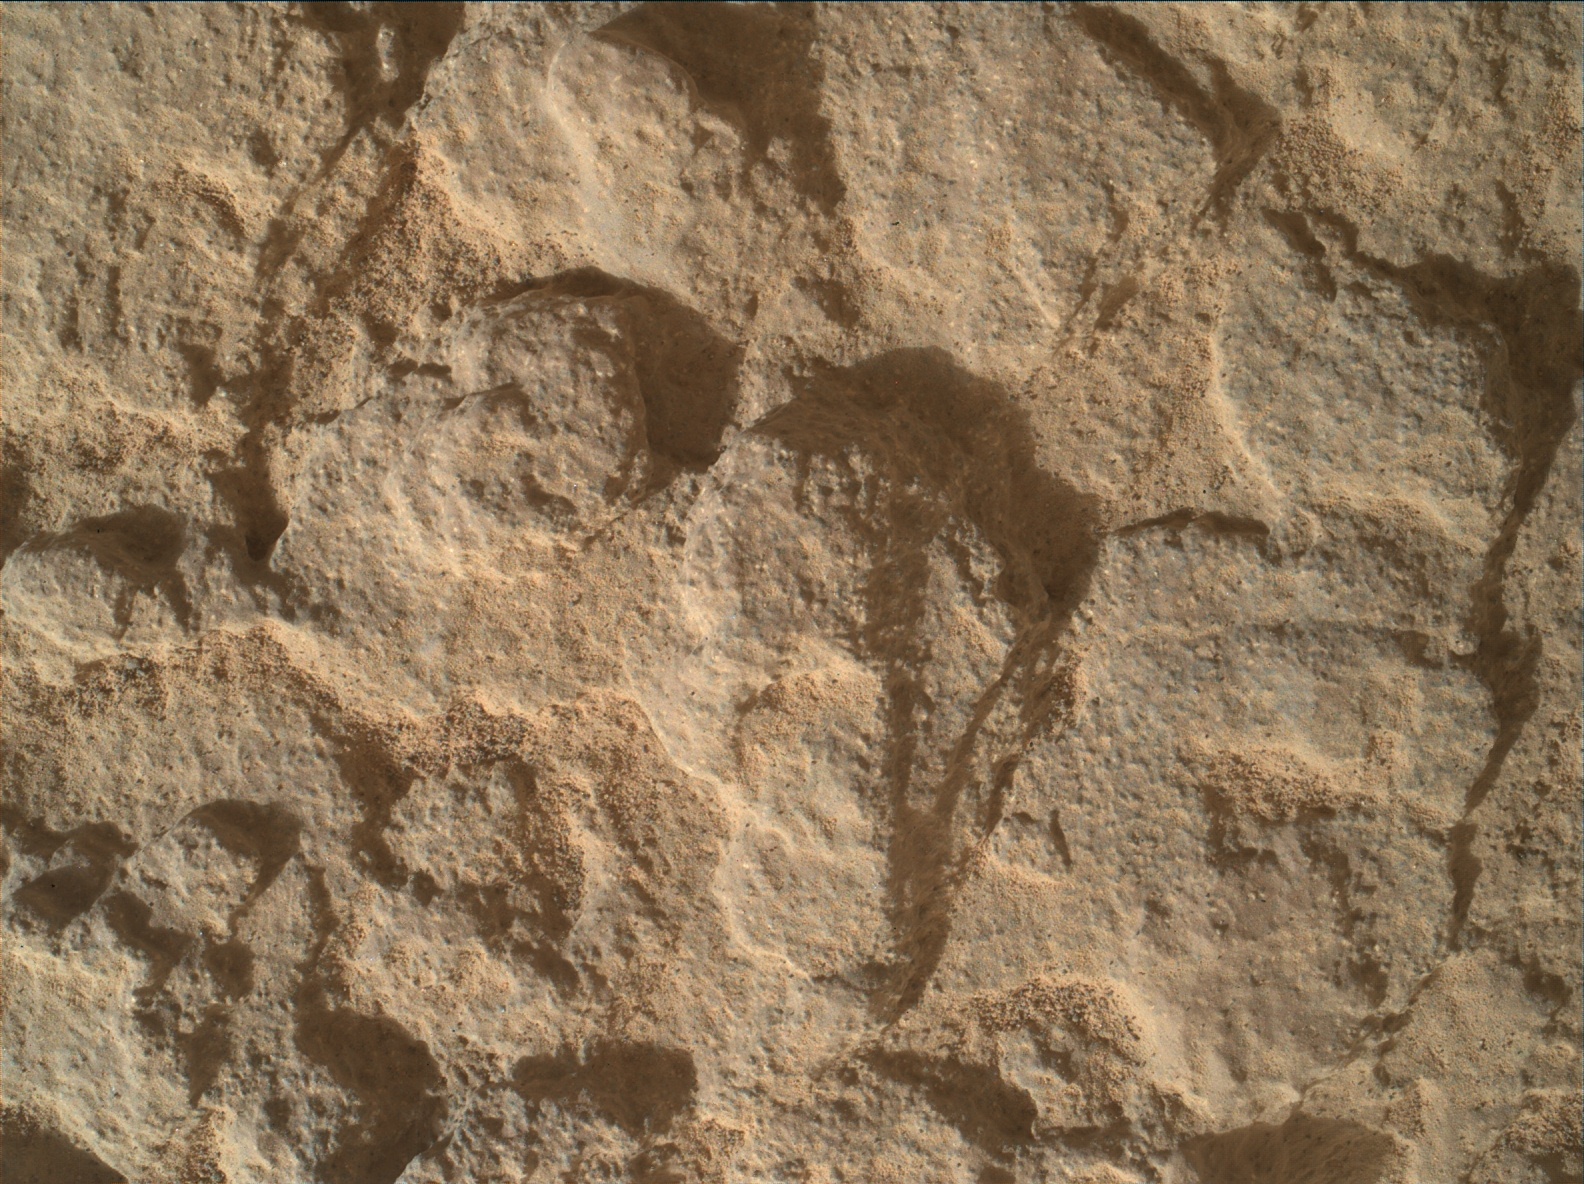 Nasa's Mars rover Curiosity acquired this image using its Mars Hand Lens Imager (MAHLI) on Sol 1711